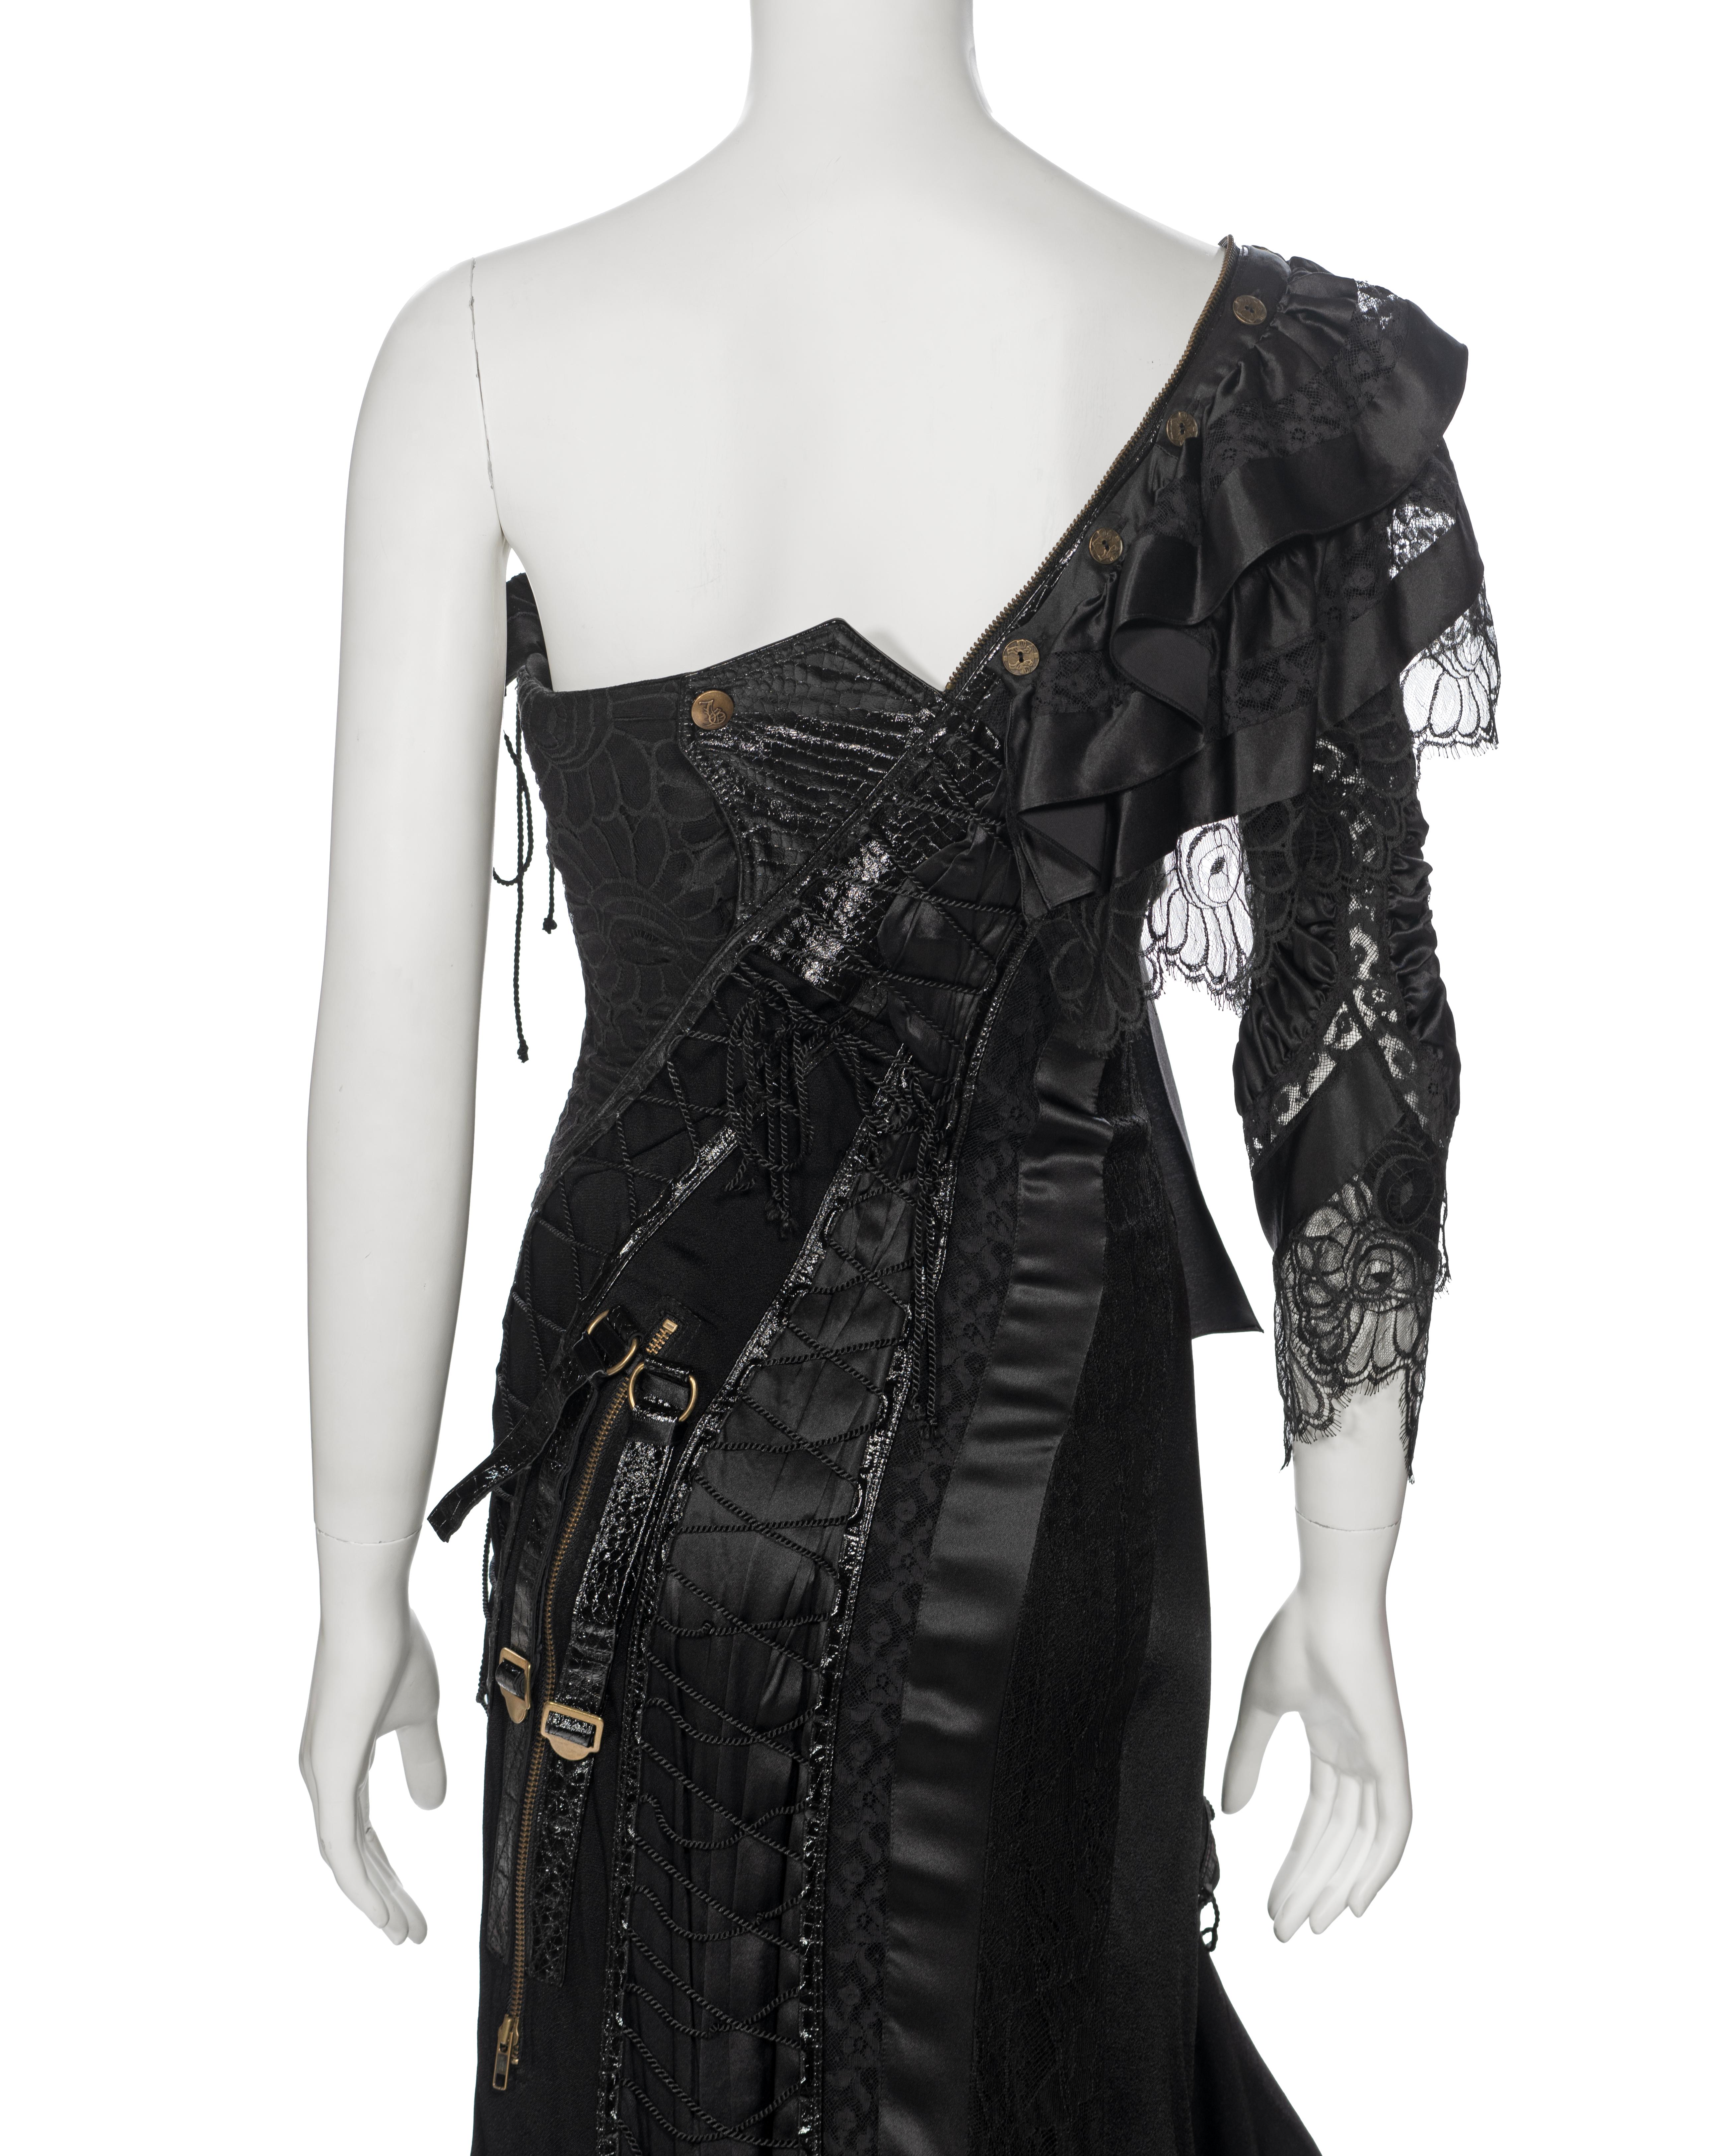 John Galliano Black Deconstructed Silk and Lace Evening Dress, ss 2002 For Sale 7